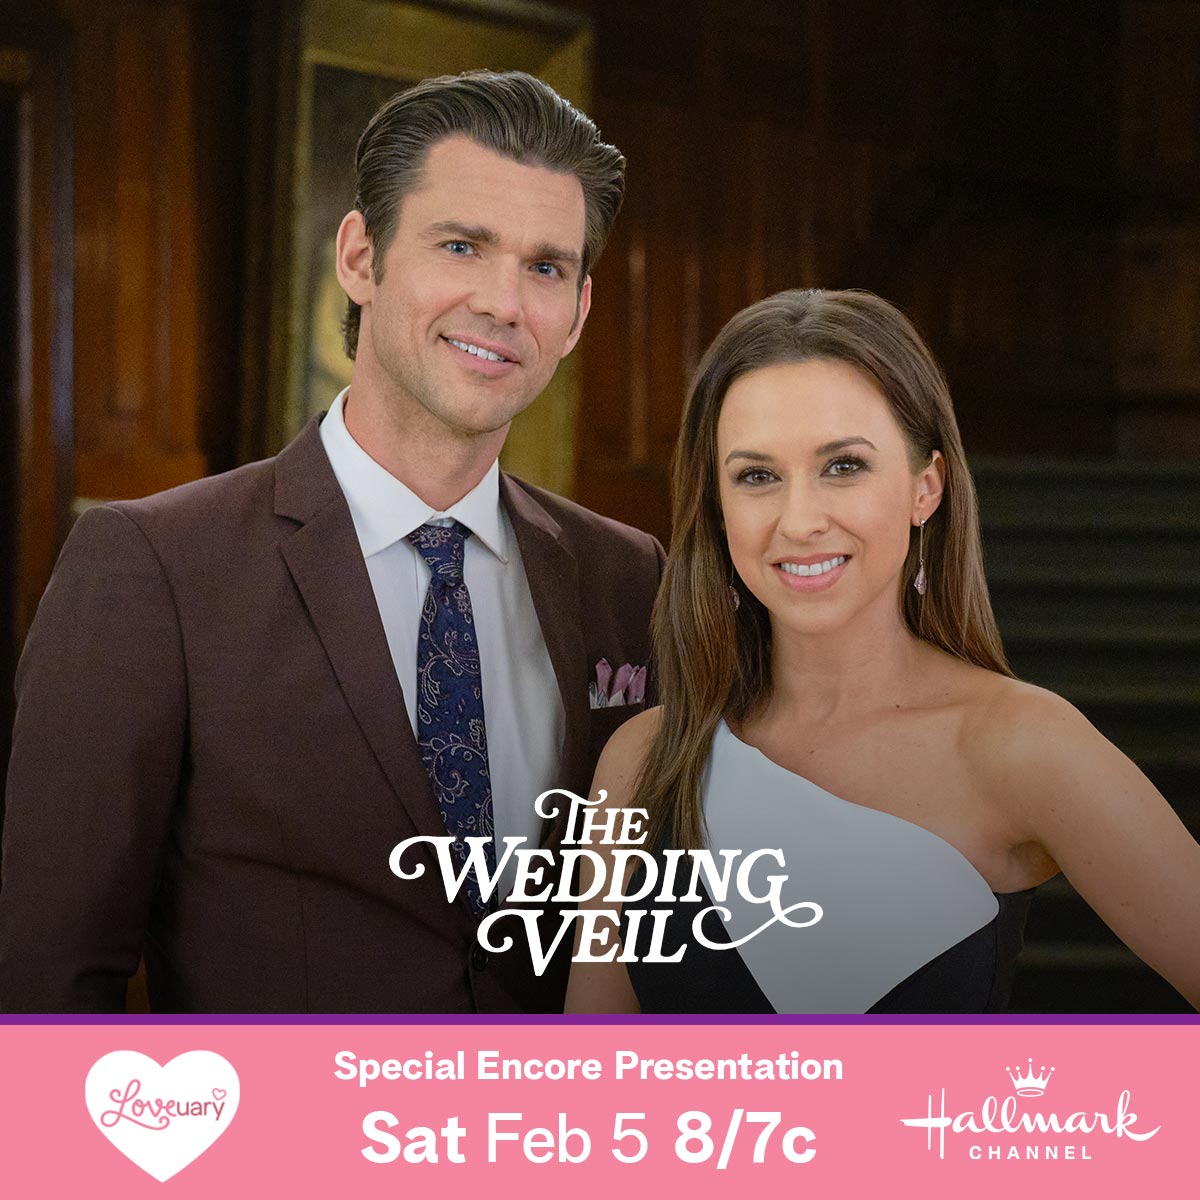 Hallmark Channel's LOVEUARY Original Premiere of "The Wedding Veil" on Saturday, February 5th at 8pm7c!